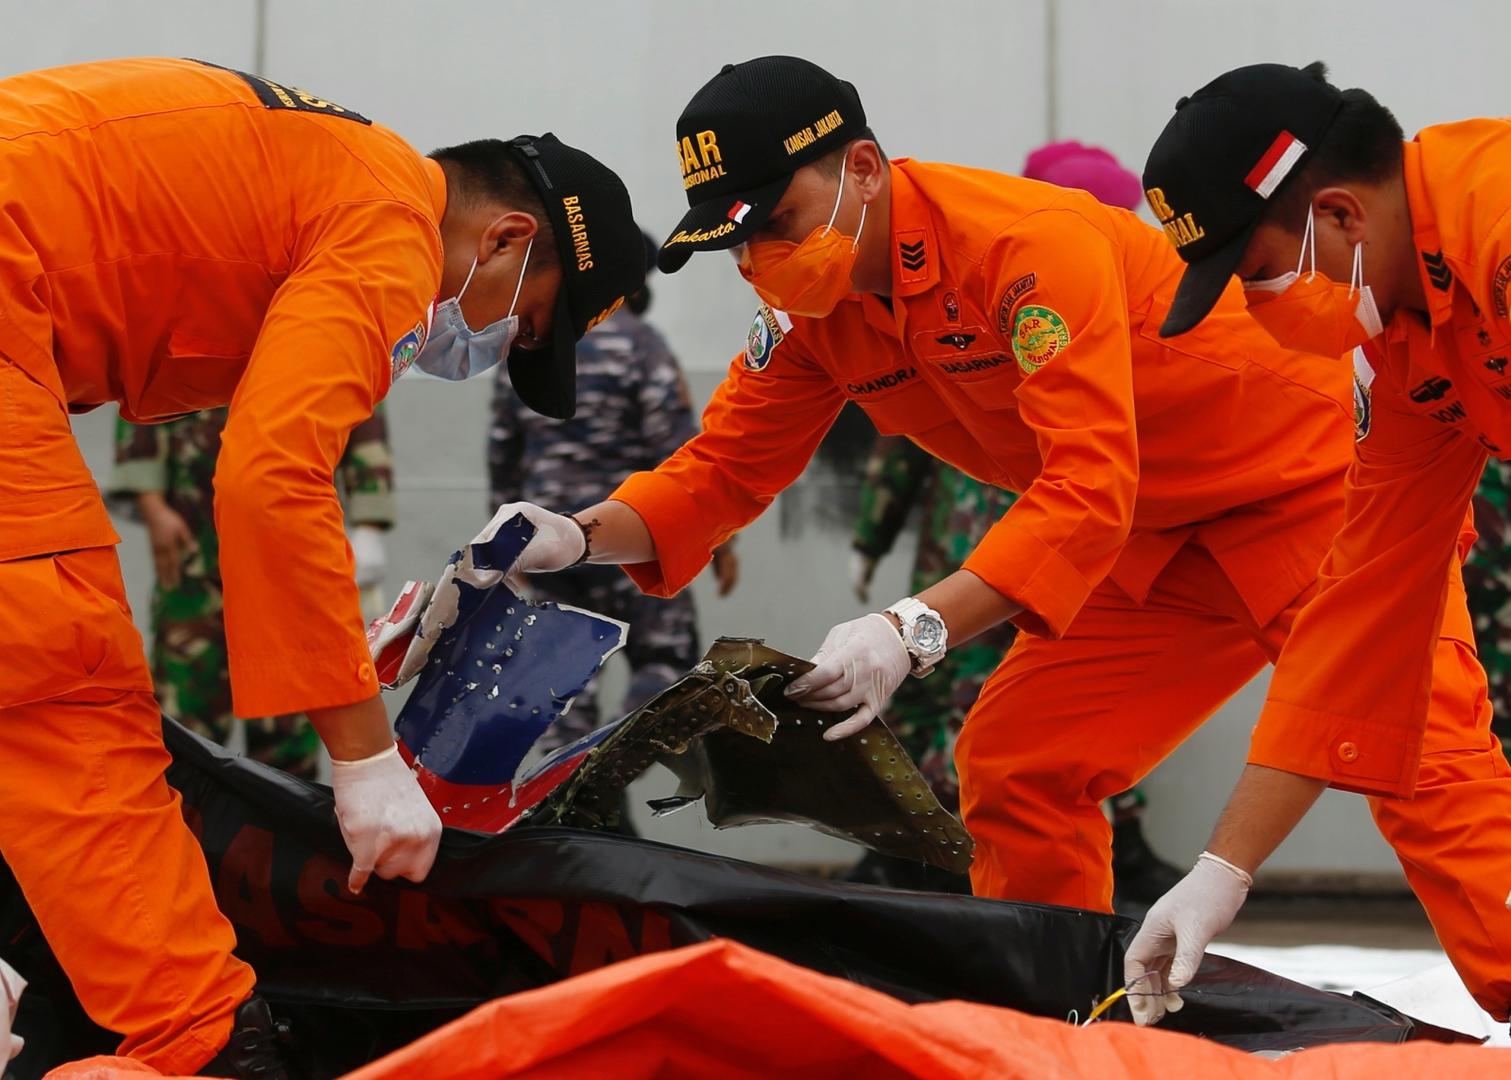 Indonesian rescue members inspect what is believed to be the remains of the Sriwijaya Air plane flight SJ182, which crashed into the sea, at Jakarta International Container Terminal port in Jakarta Indonesian rescue members inspect what is believed to be the remains of the Sriwijaya Air plane flight SJ182, which crashed into the sea, at Jakarta International Container Terminal port in Jakarta, Indonesia, January 10, 2021. REUTERS/Ajeng Dinar Ulfiana AJENG DINAR ULFIANA